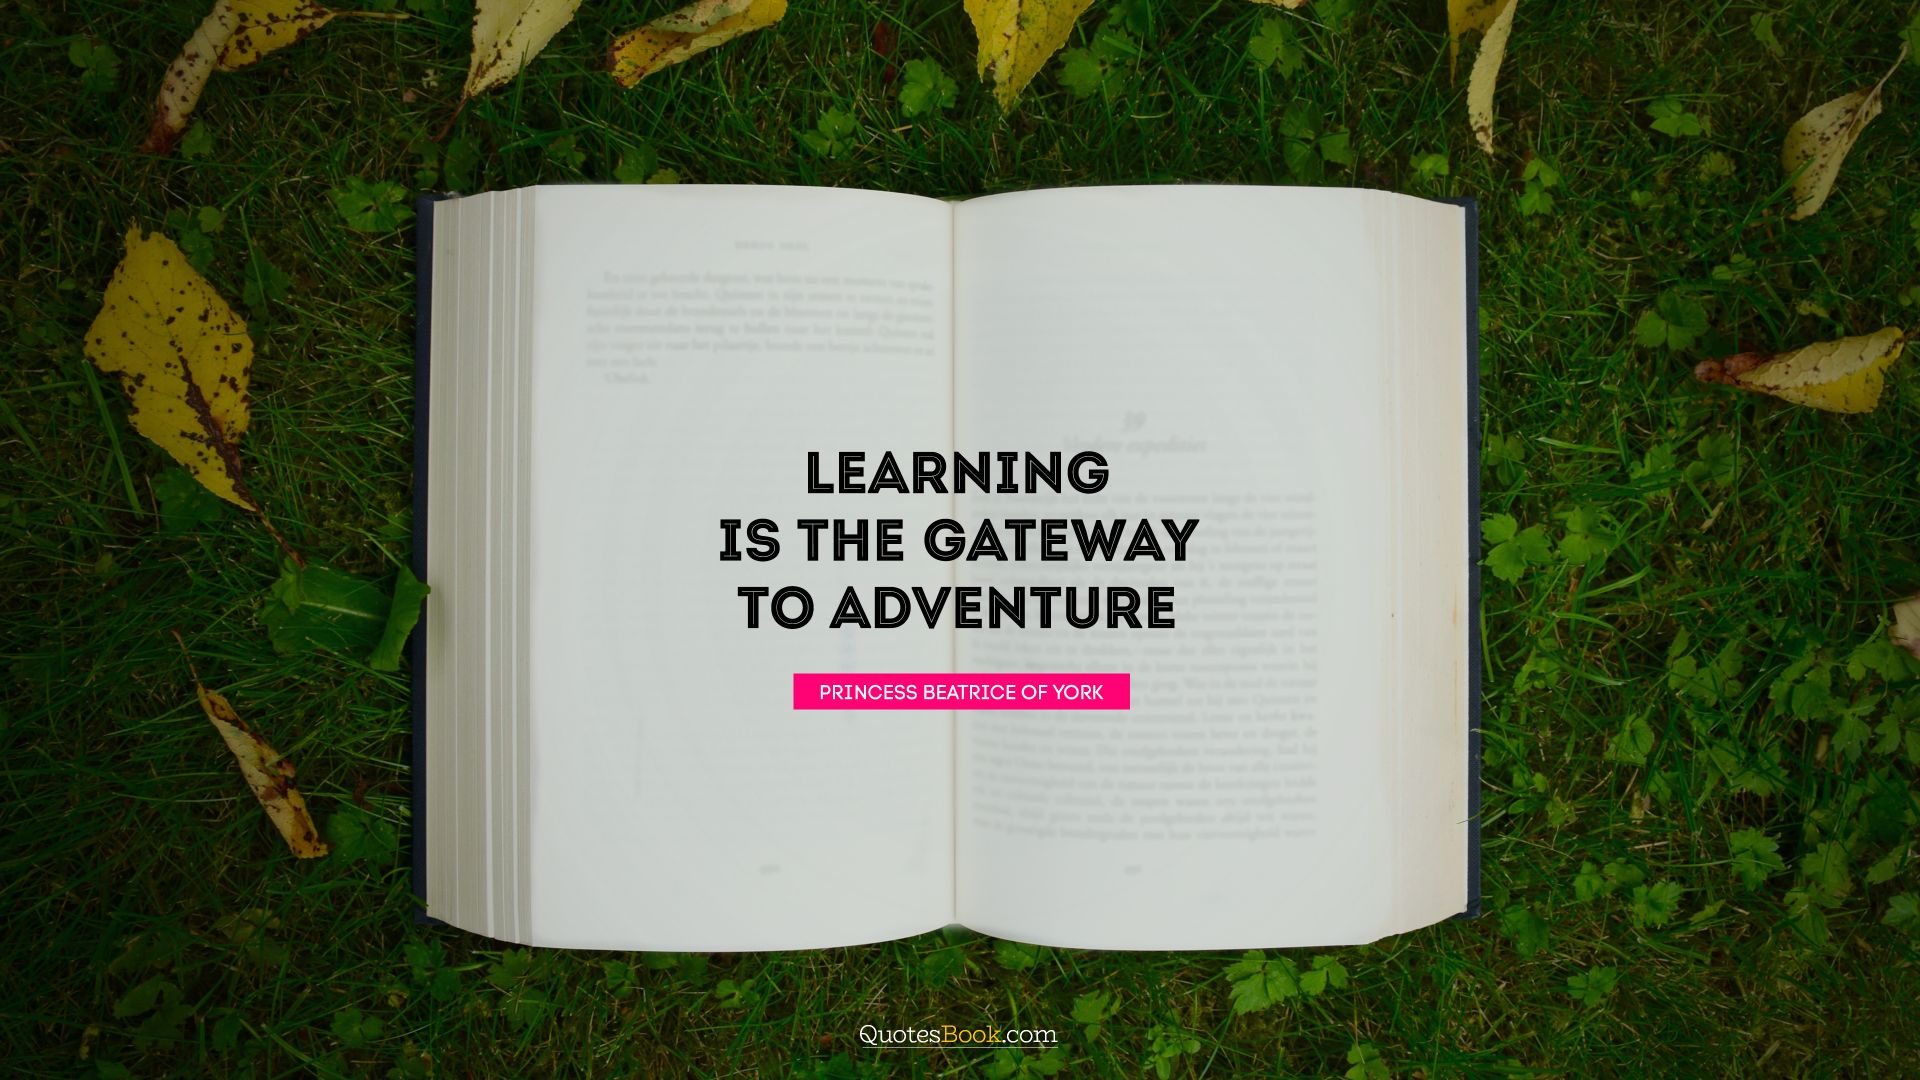 Learning is the gateway to adventure. - Quote by Princess Beatrice of York